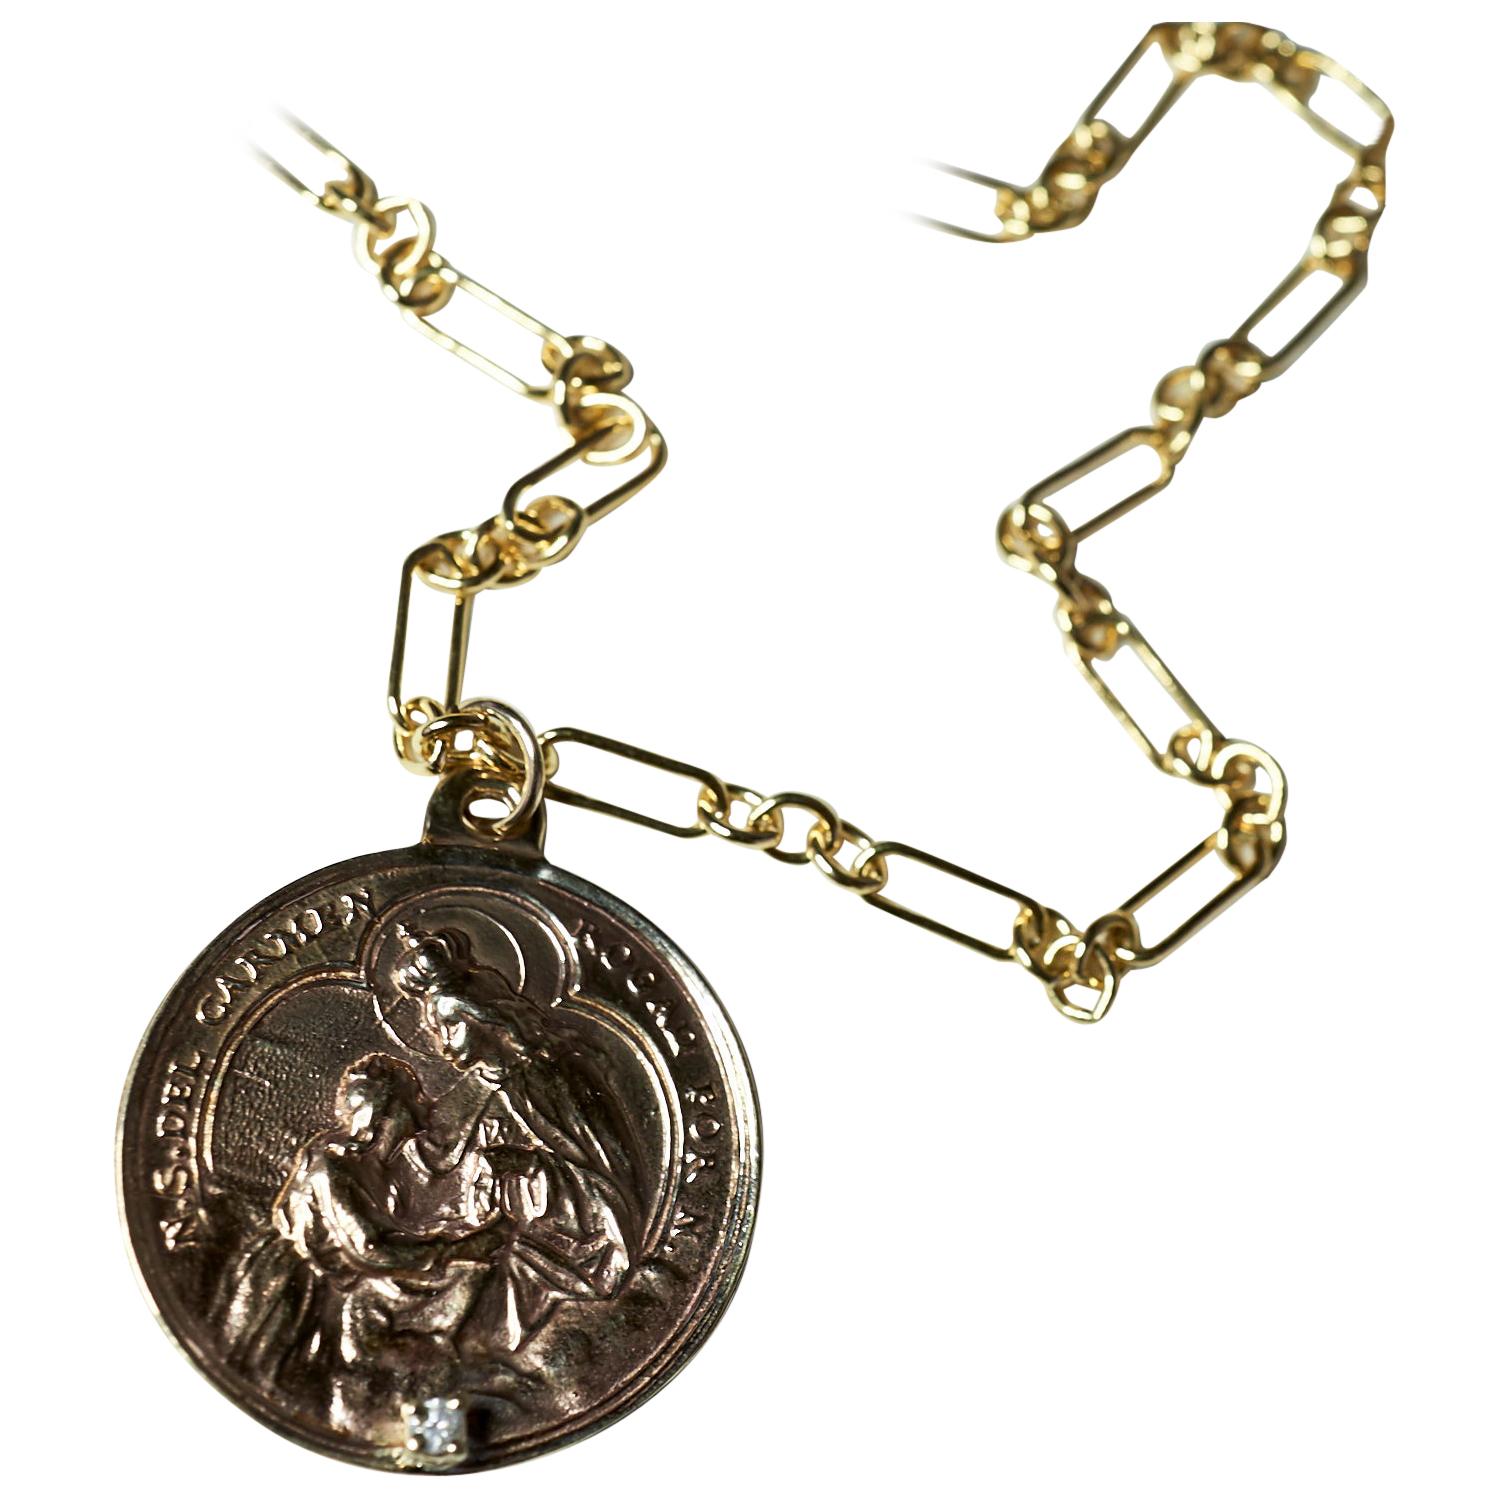 Diamond Virgin Mary Medal Coin Pendant Chain Necklace J Dauphin For Sale